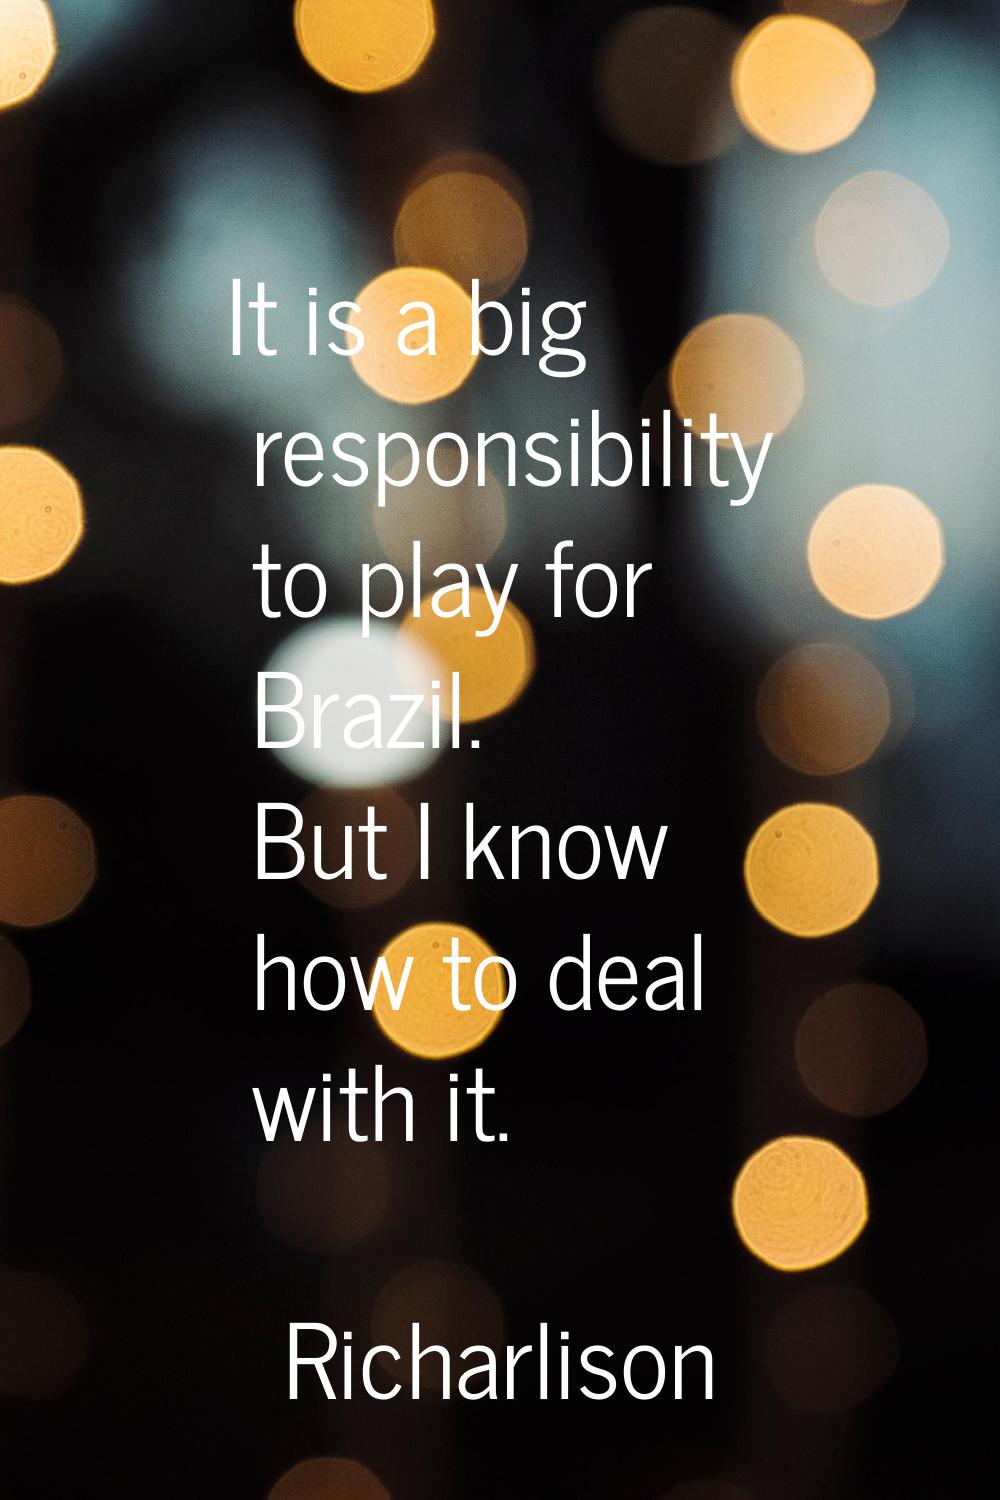 It is a big responsibility to play for Brazil. But I know how to deal with it.